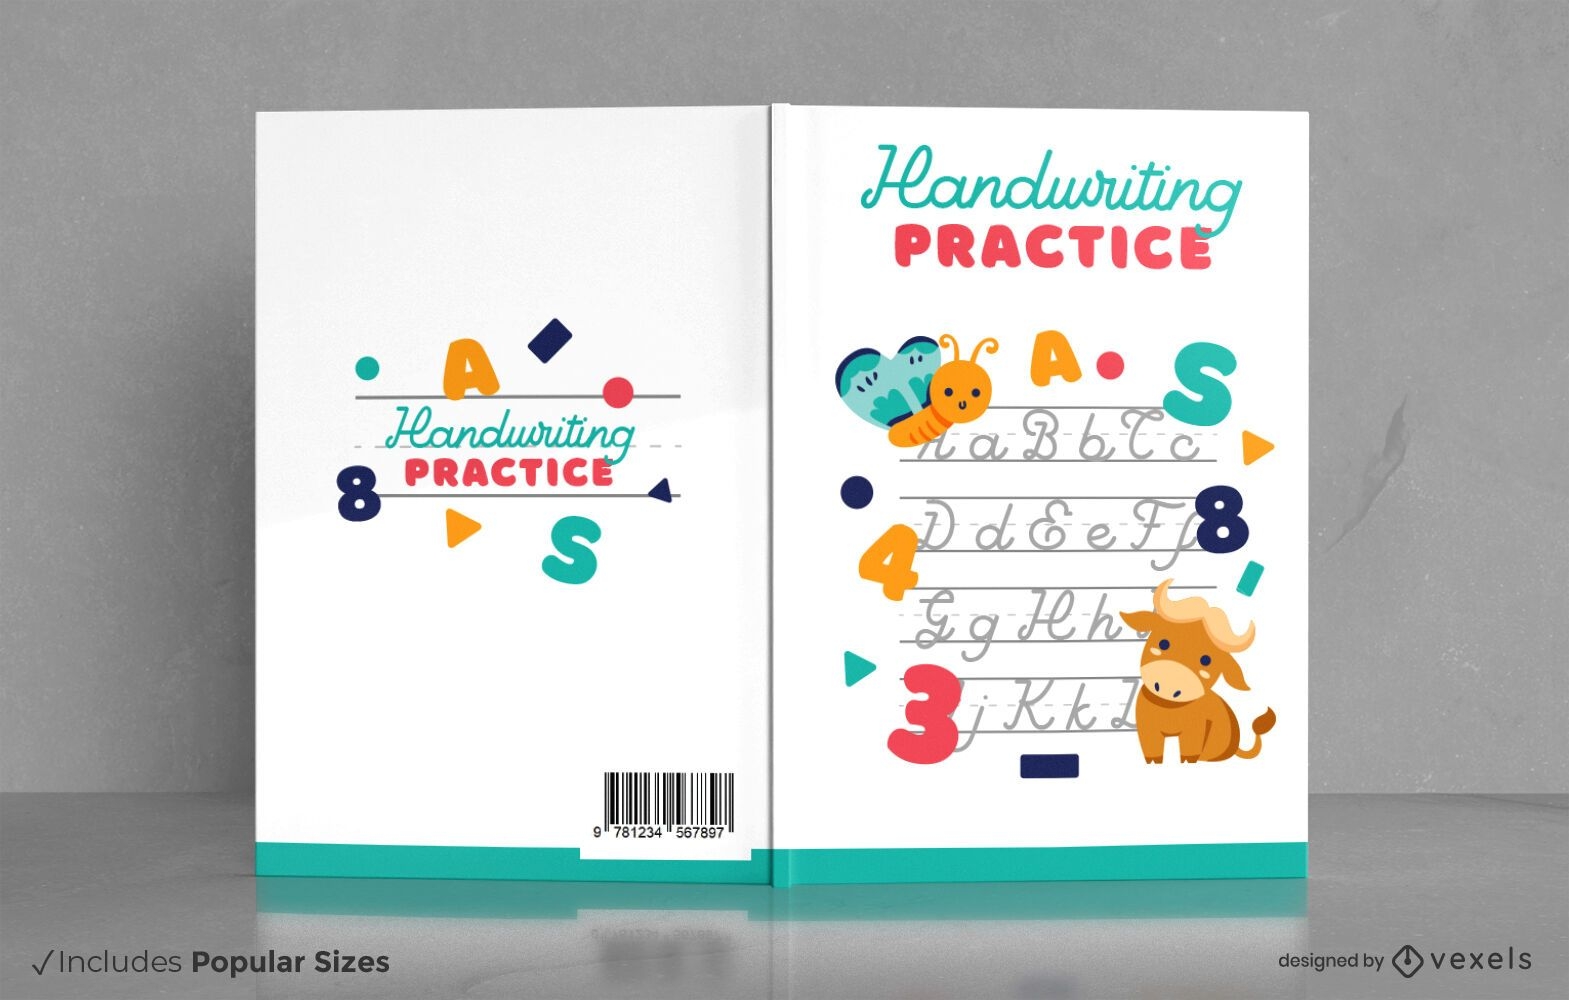 Handwriting For Children Book Cover Design Vector Download